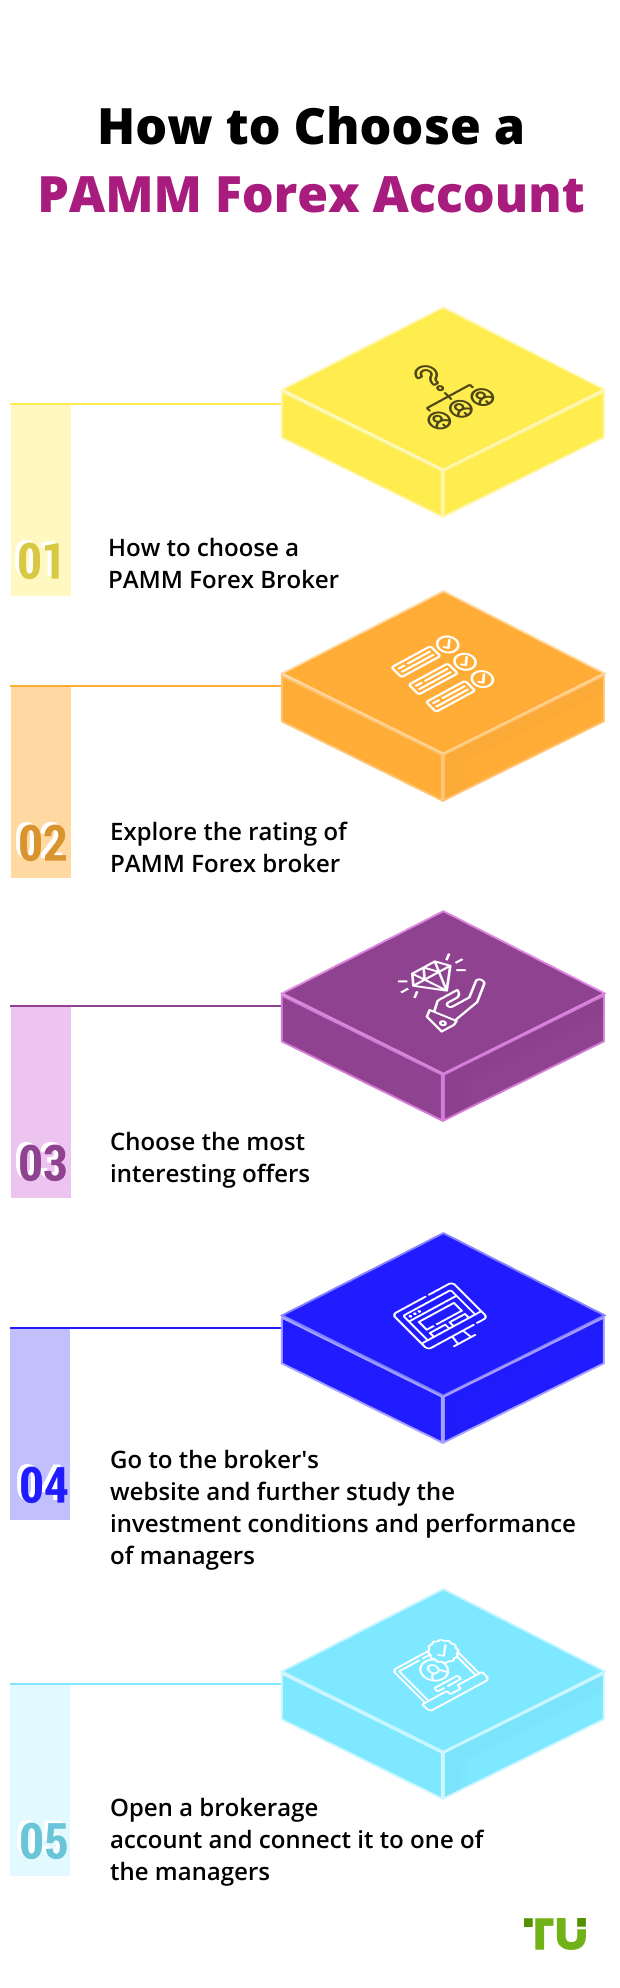 Pamm forex uk site forex trading company